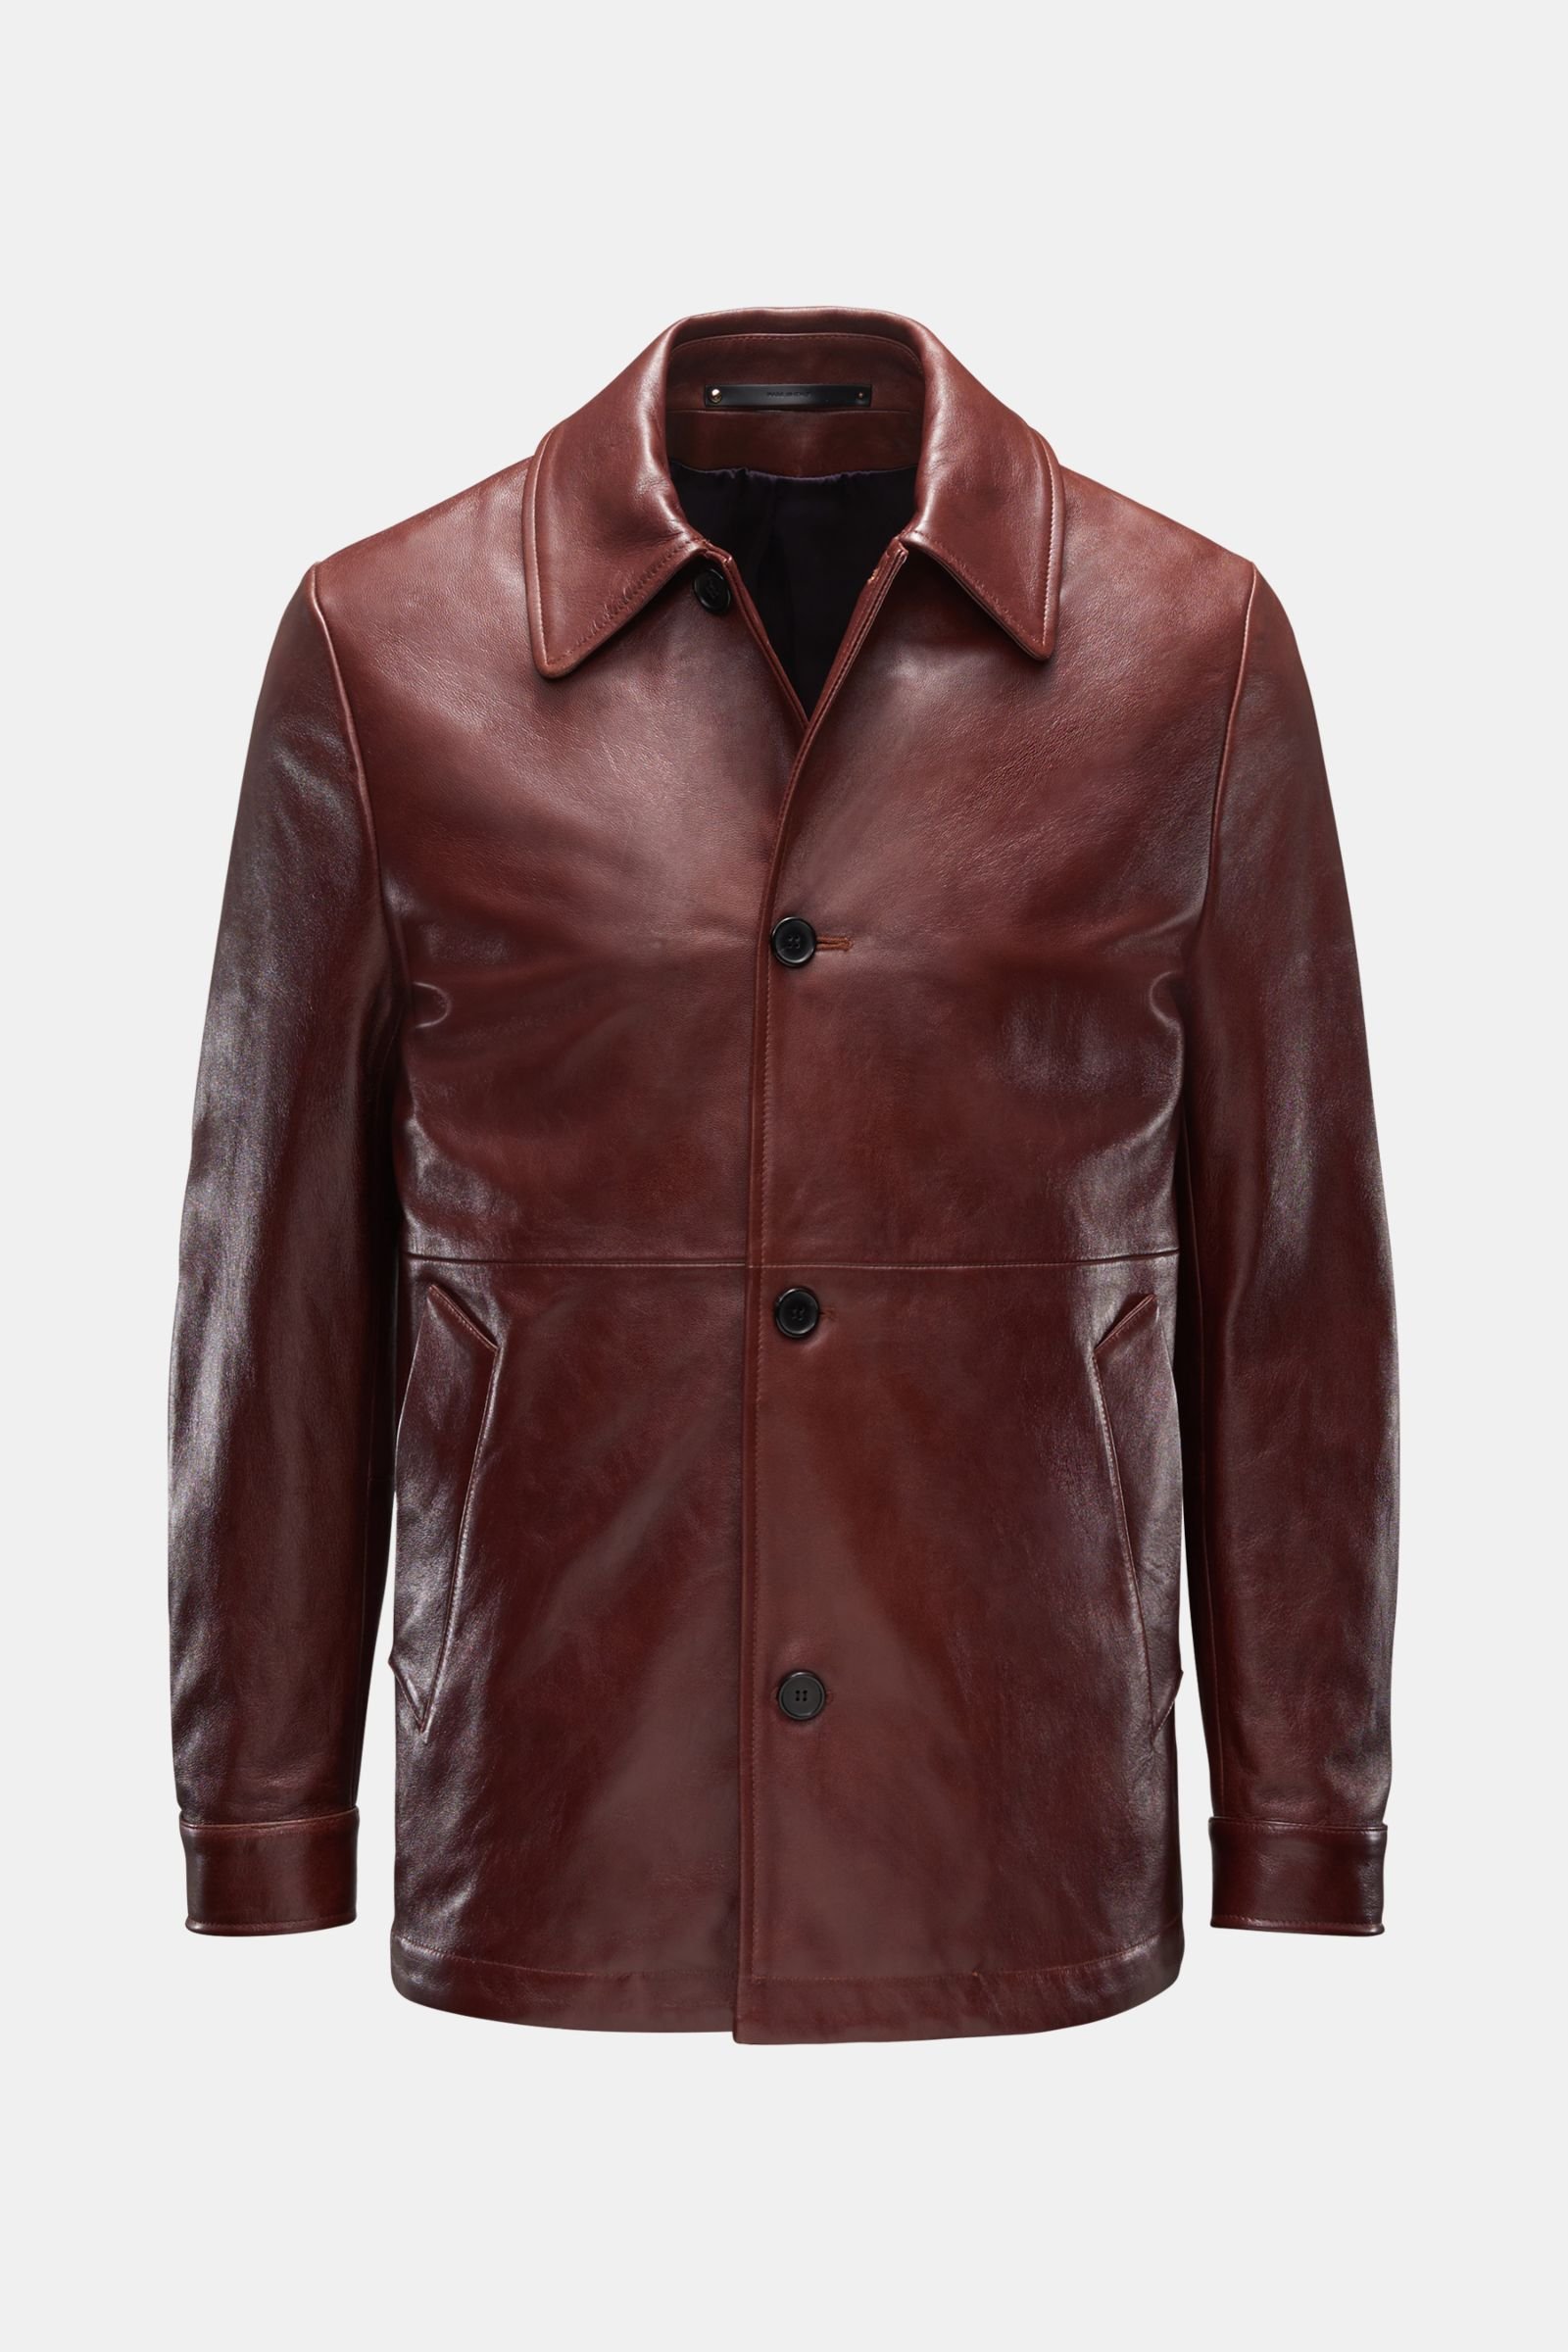 Leather jacket rust brown